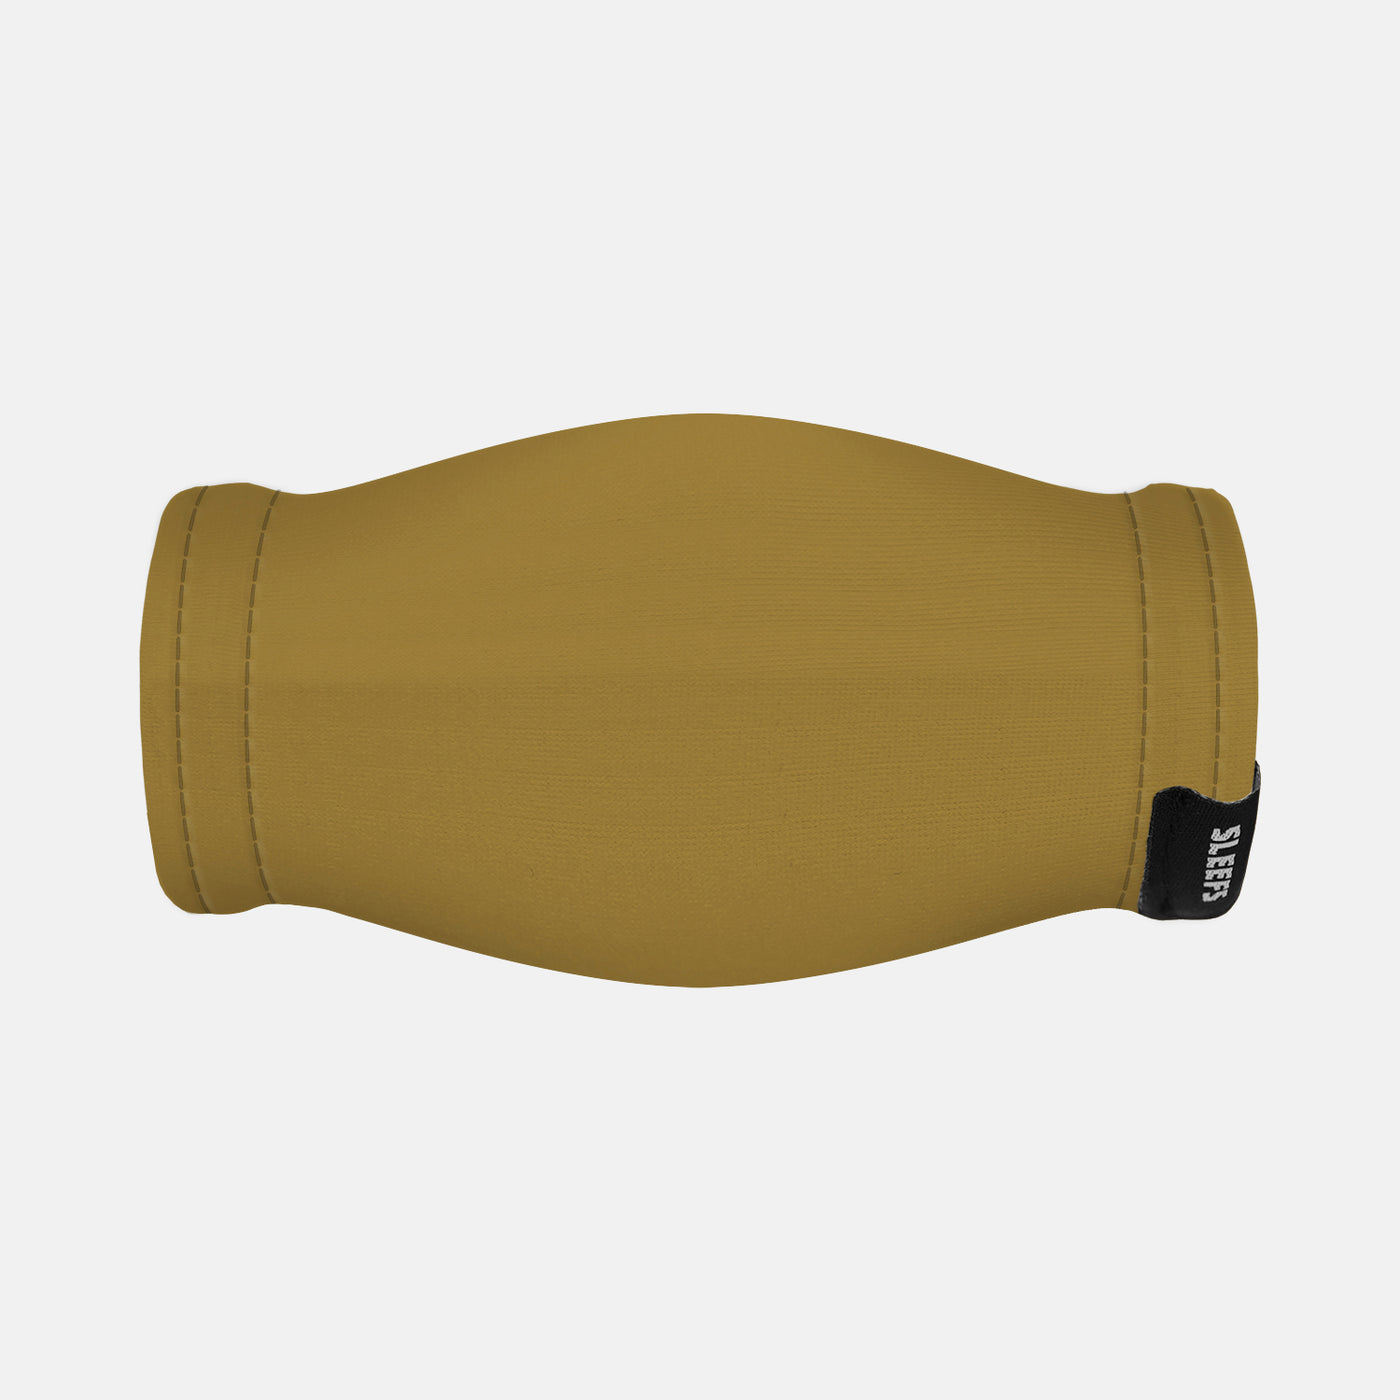 Hue Gold Chin Strap Cover